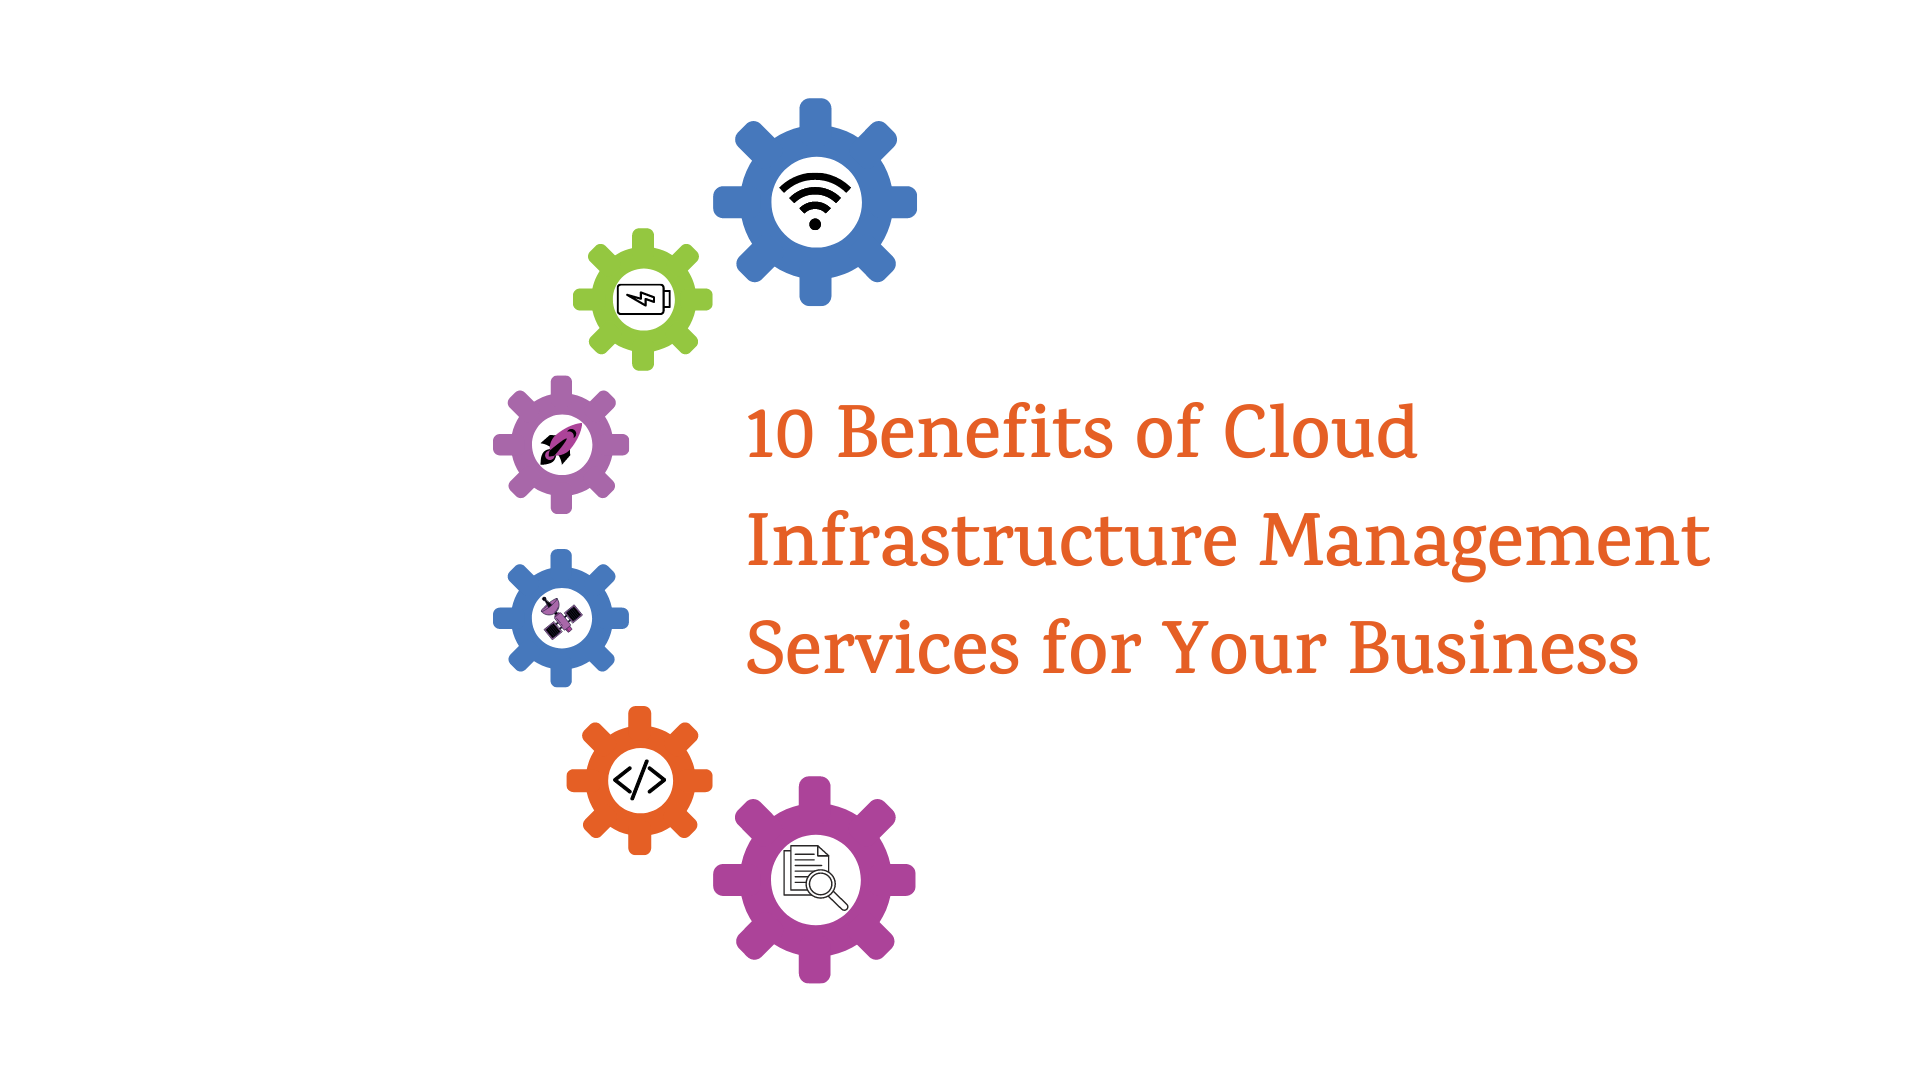 10 Benefits of Cloud Infrastructure Management Services for Your Business